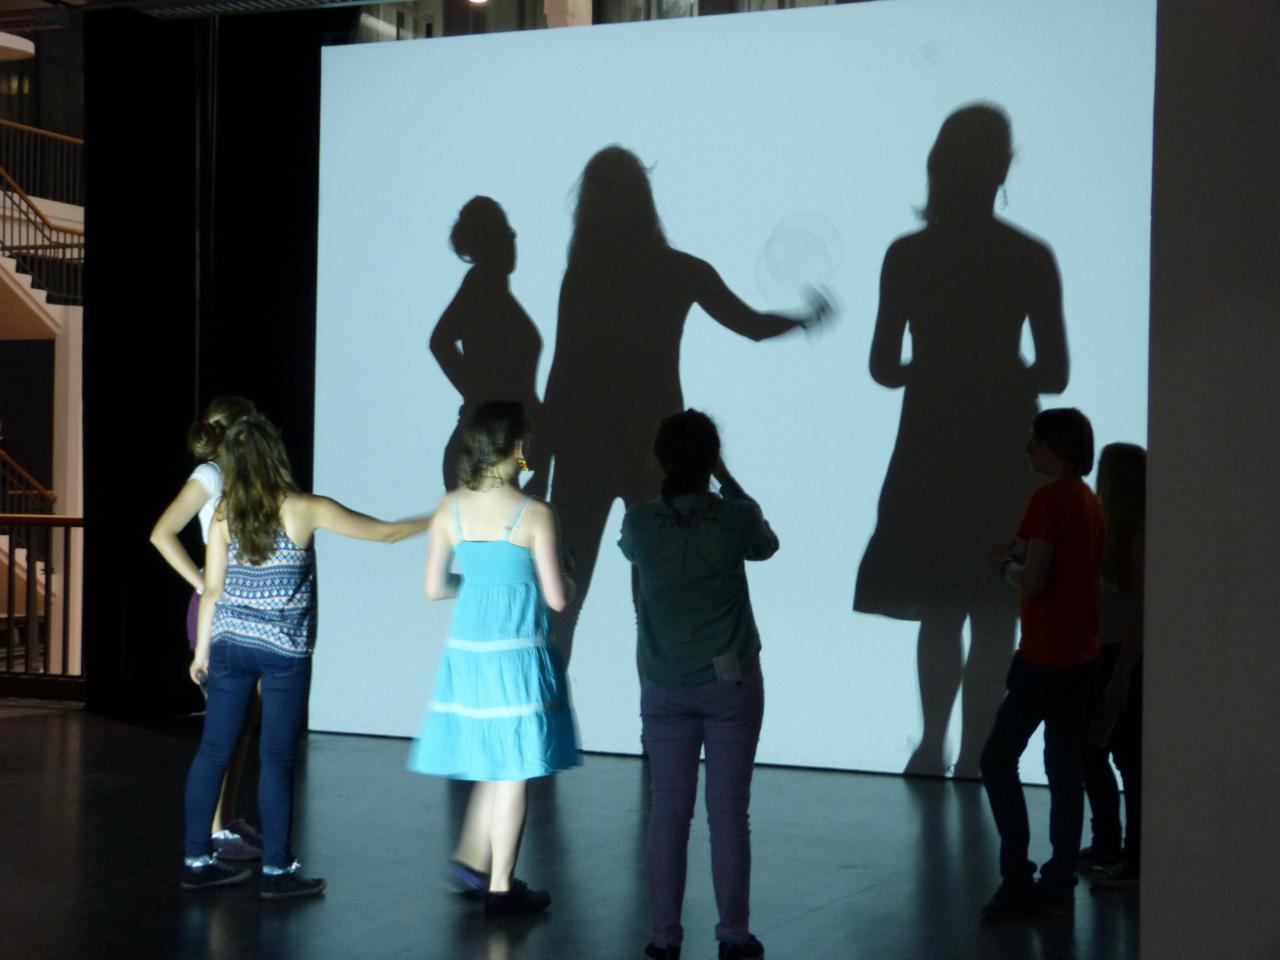 Children are standing in front of a wall where there shadows fall